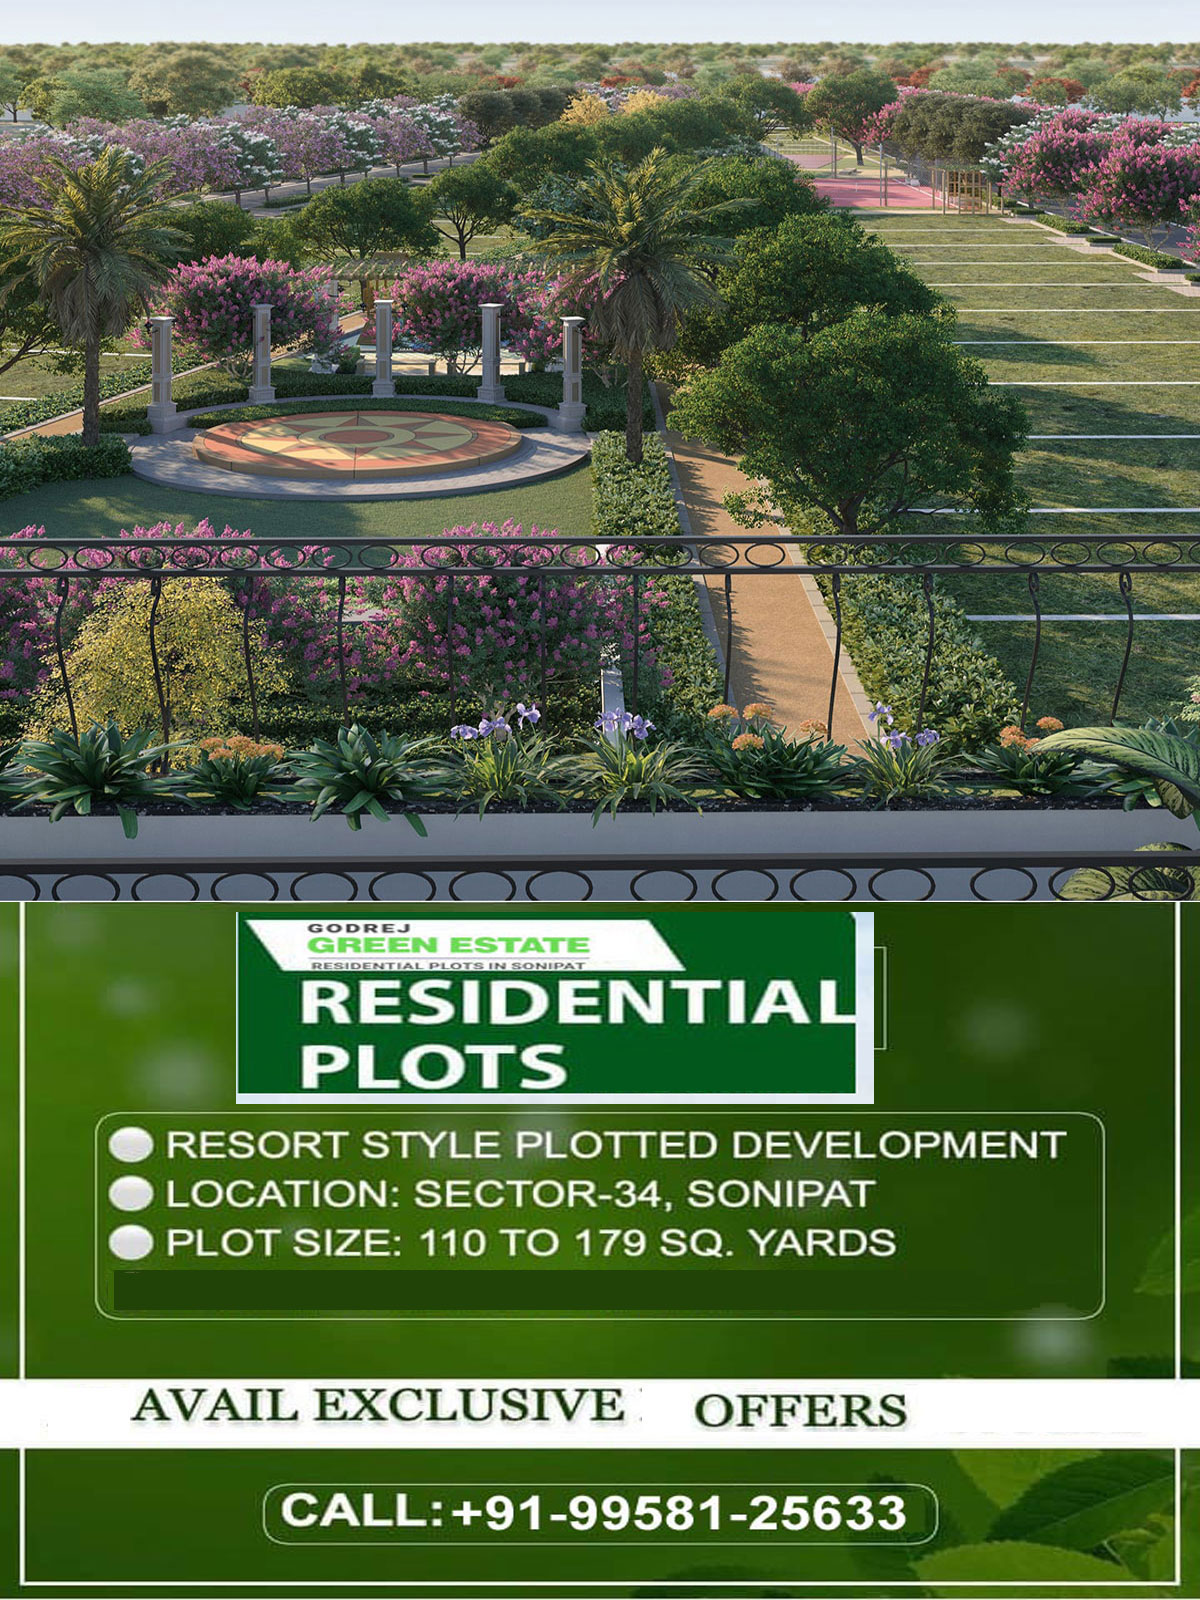 Godrej Green Estate Site Plan: An Overview of the Project